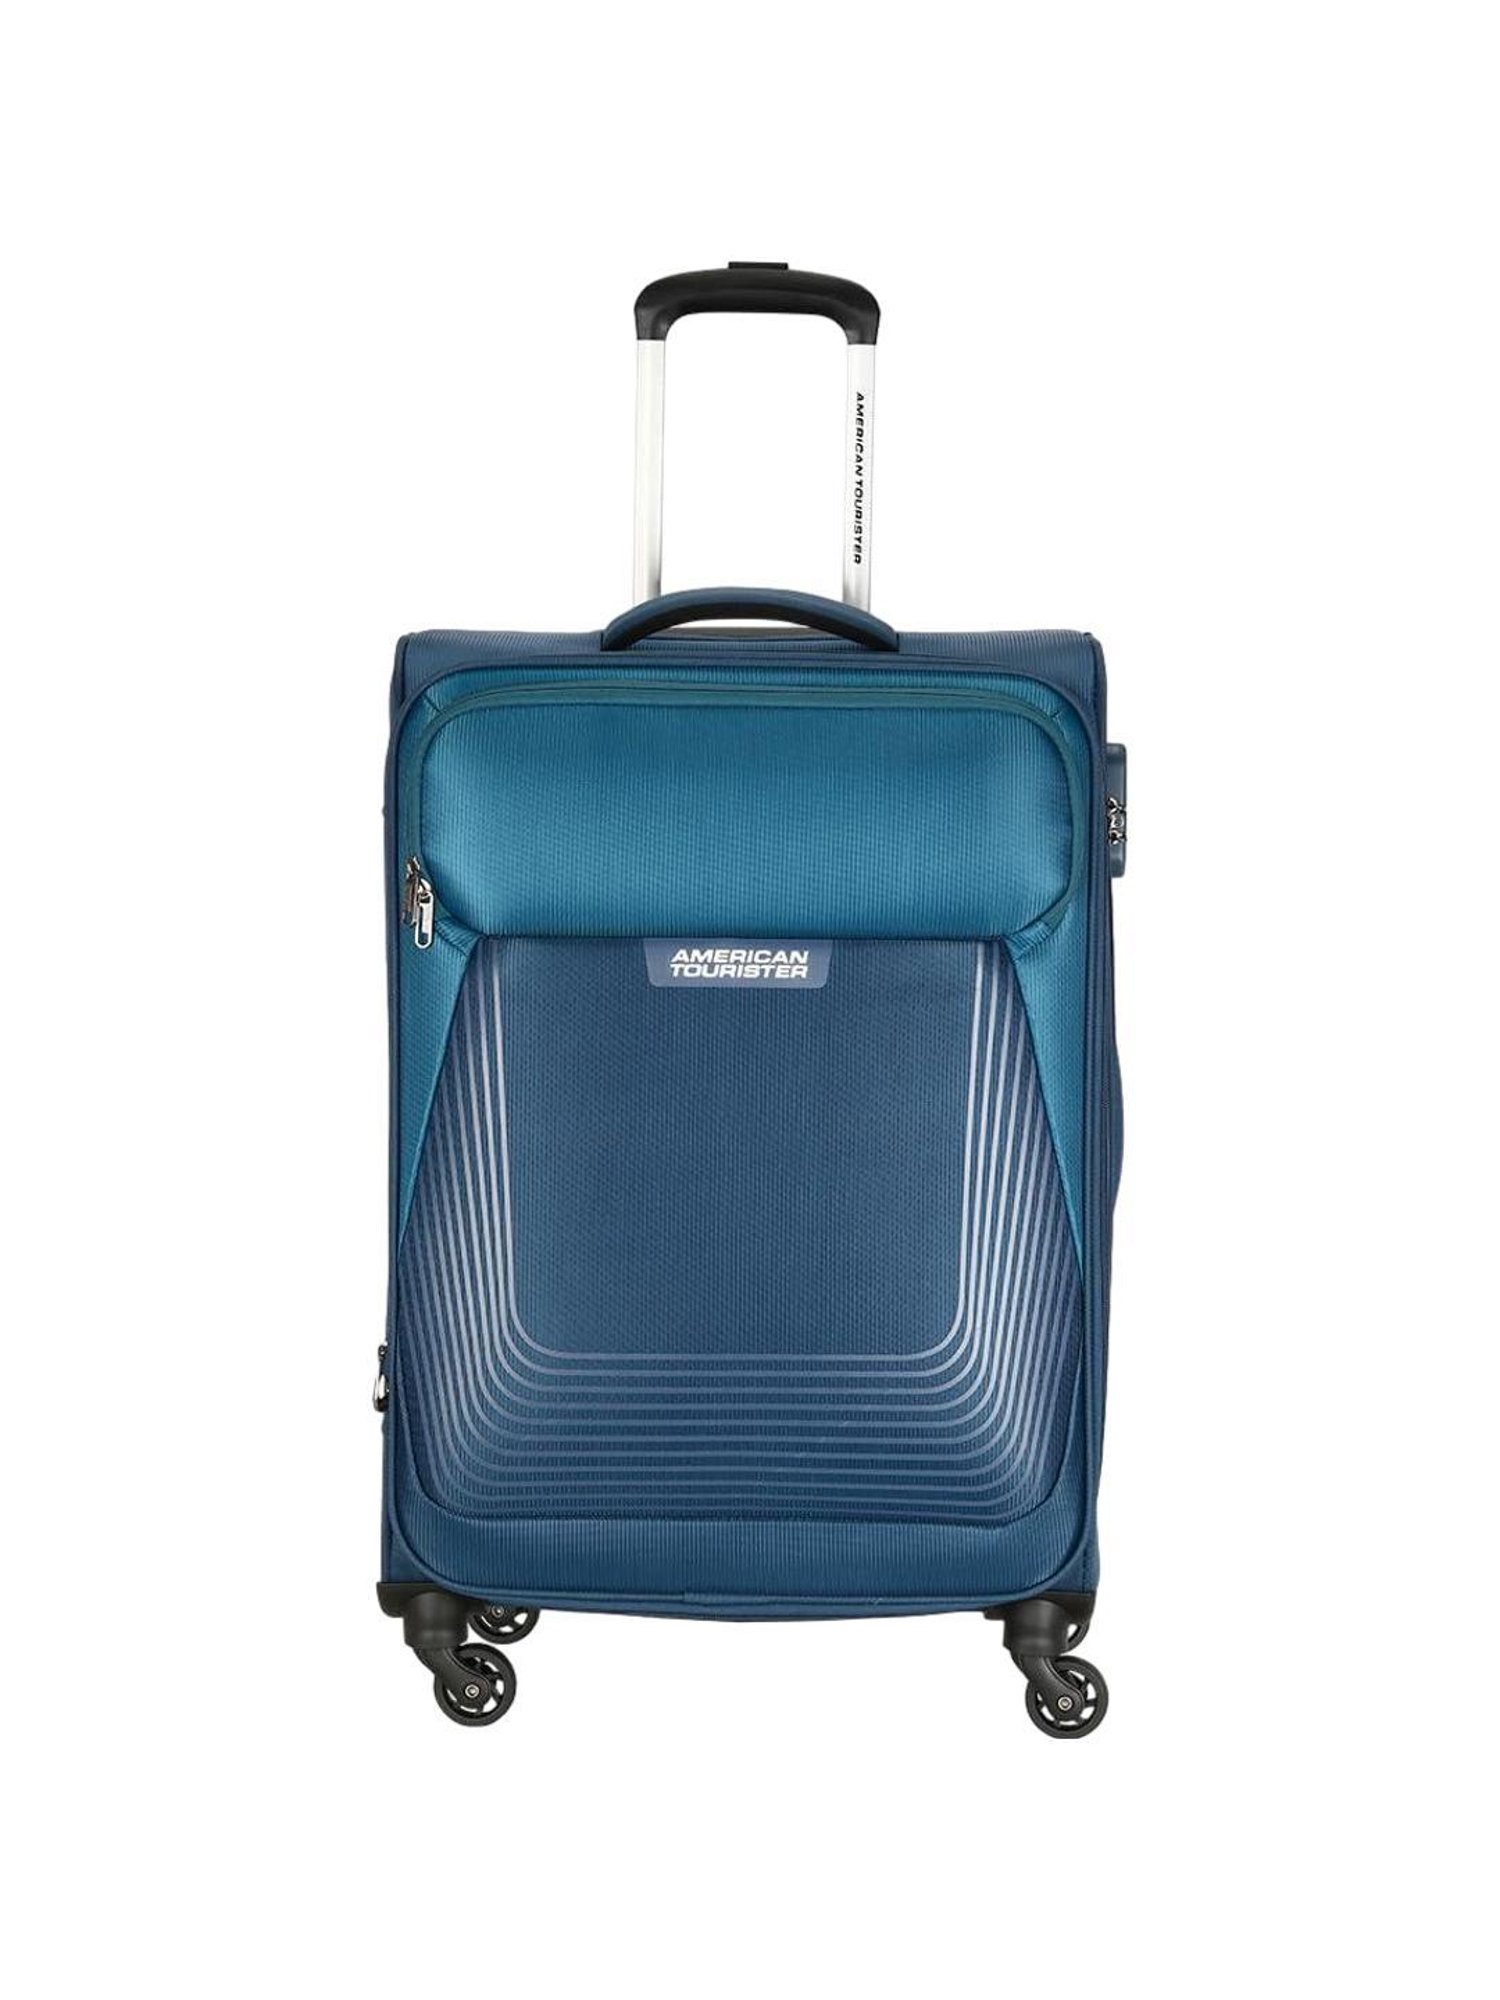 Buy American Tourister Online In India At Best Prices | Tata CLiQ